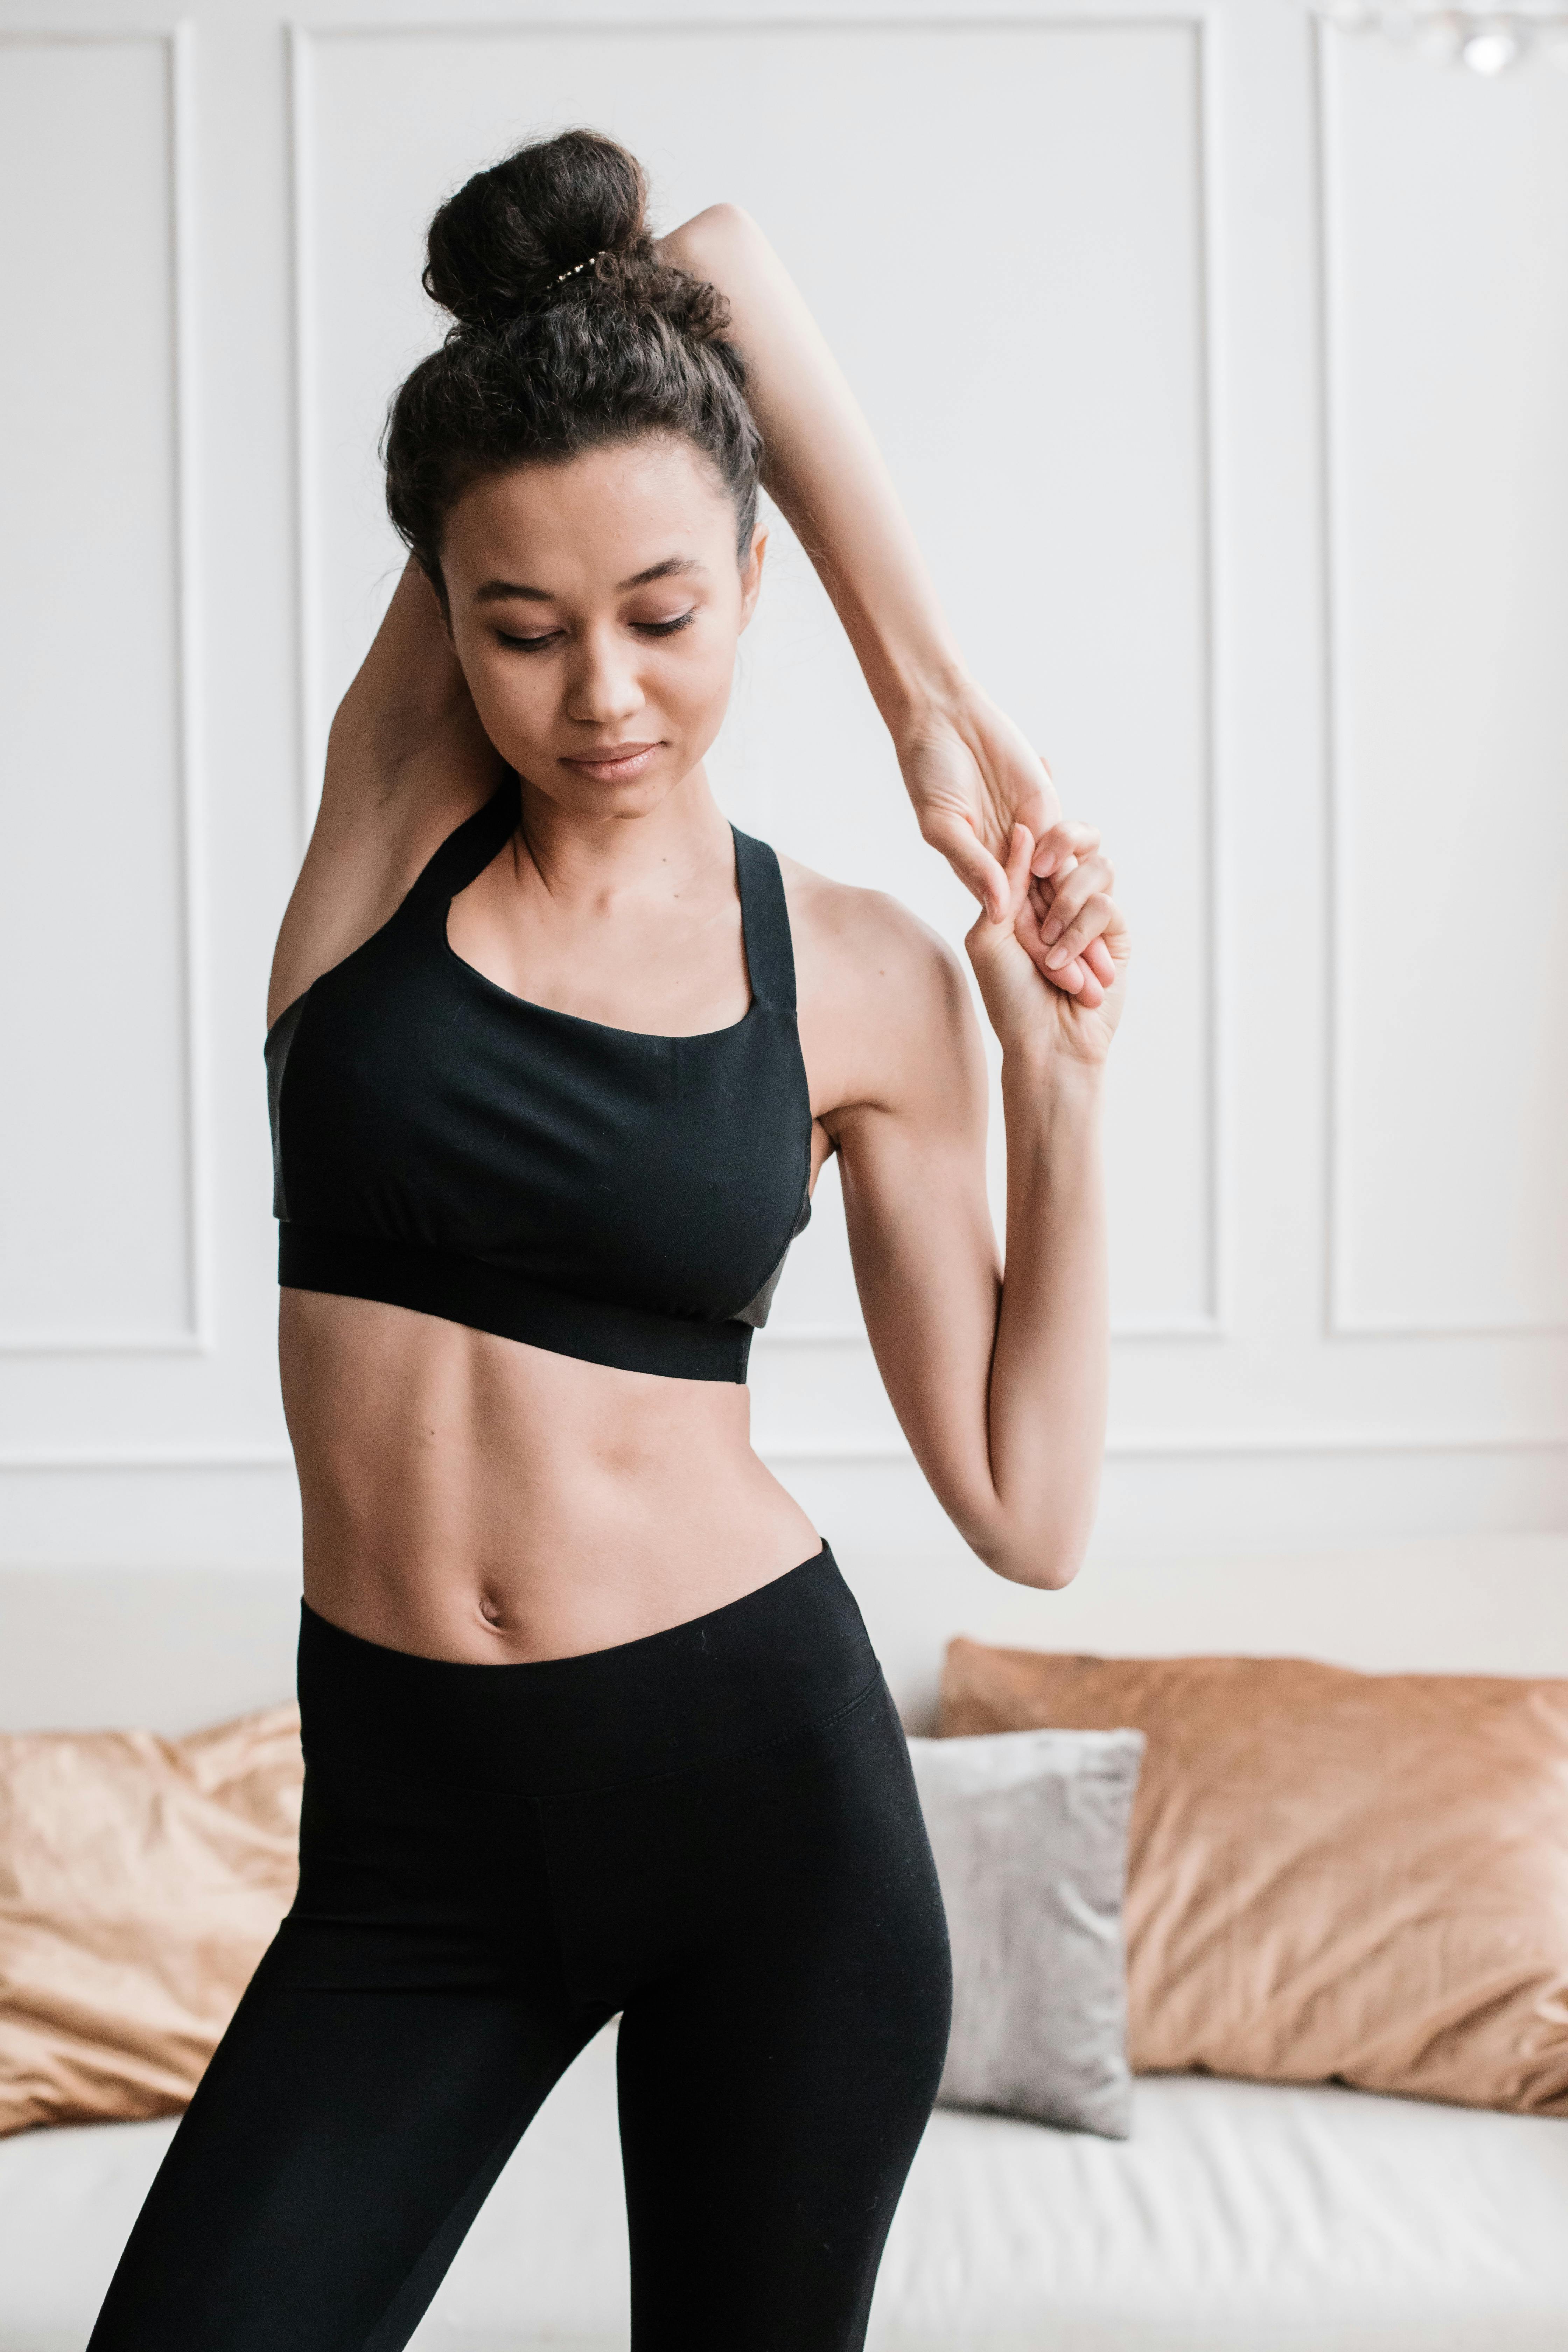 Woman in Black Sports Bra Stretching Her Arm · Free Stock Photo